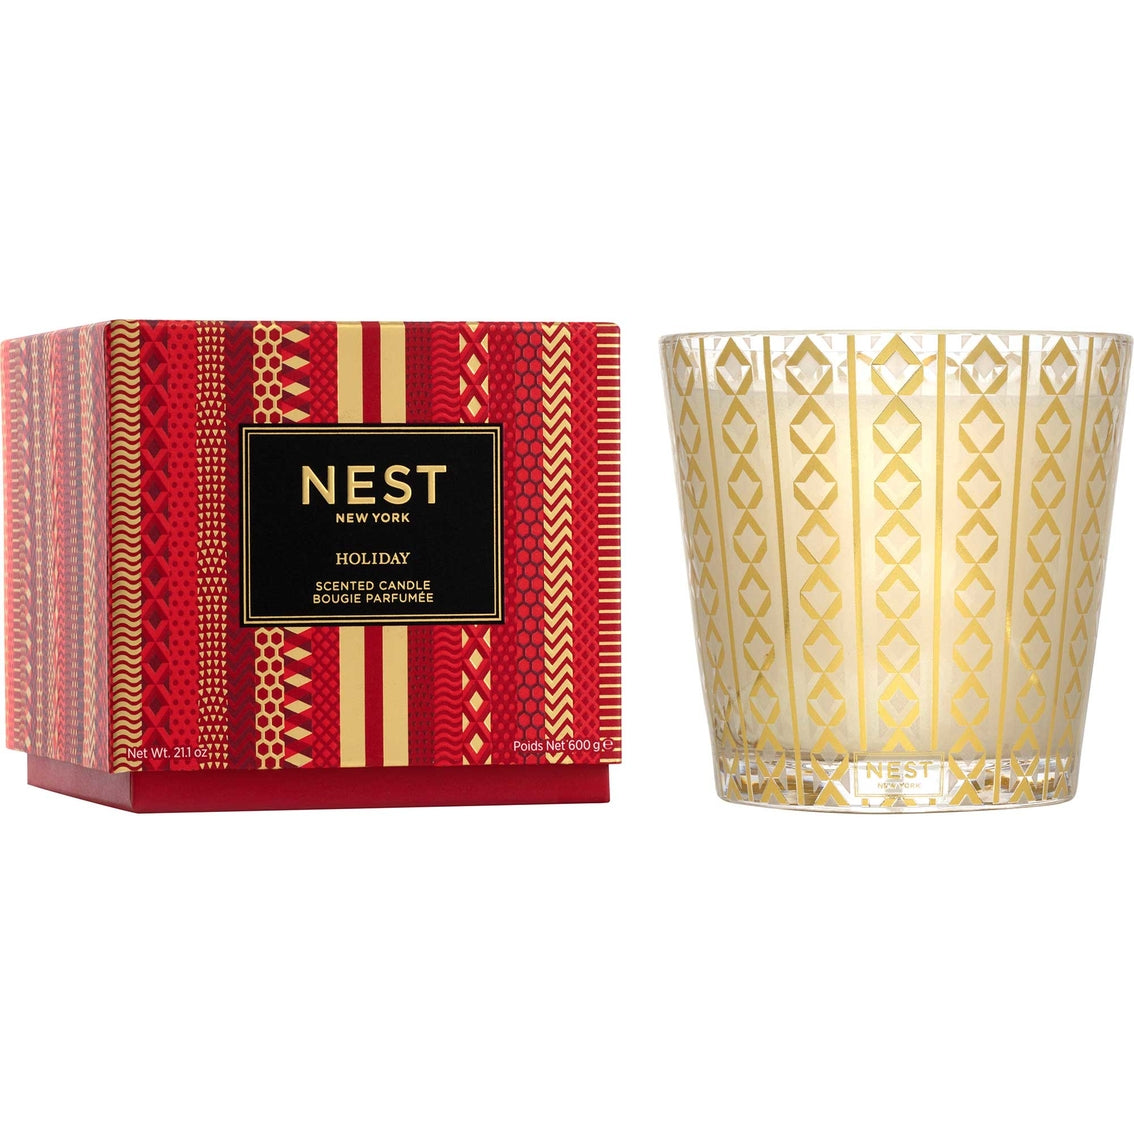 NEST New York Holiday 3-wick Candle